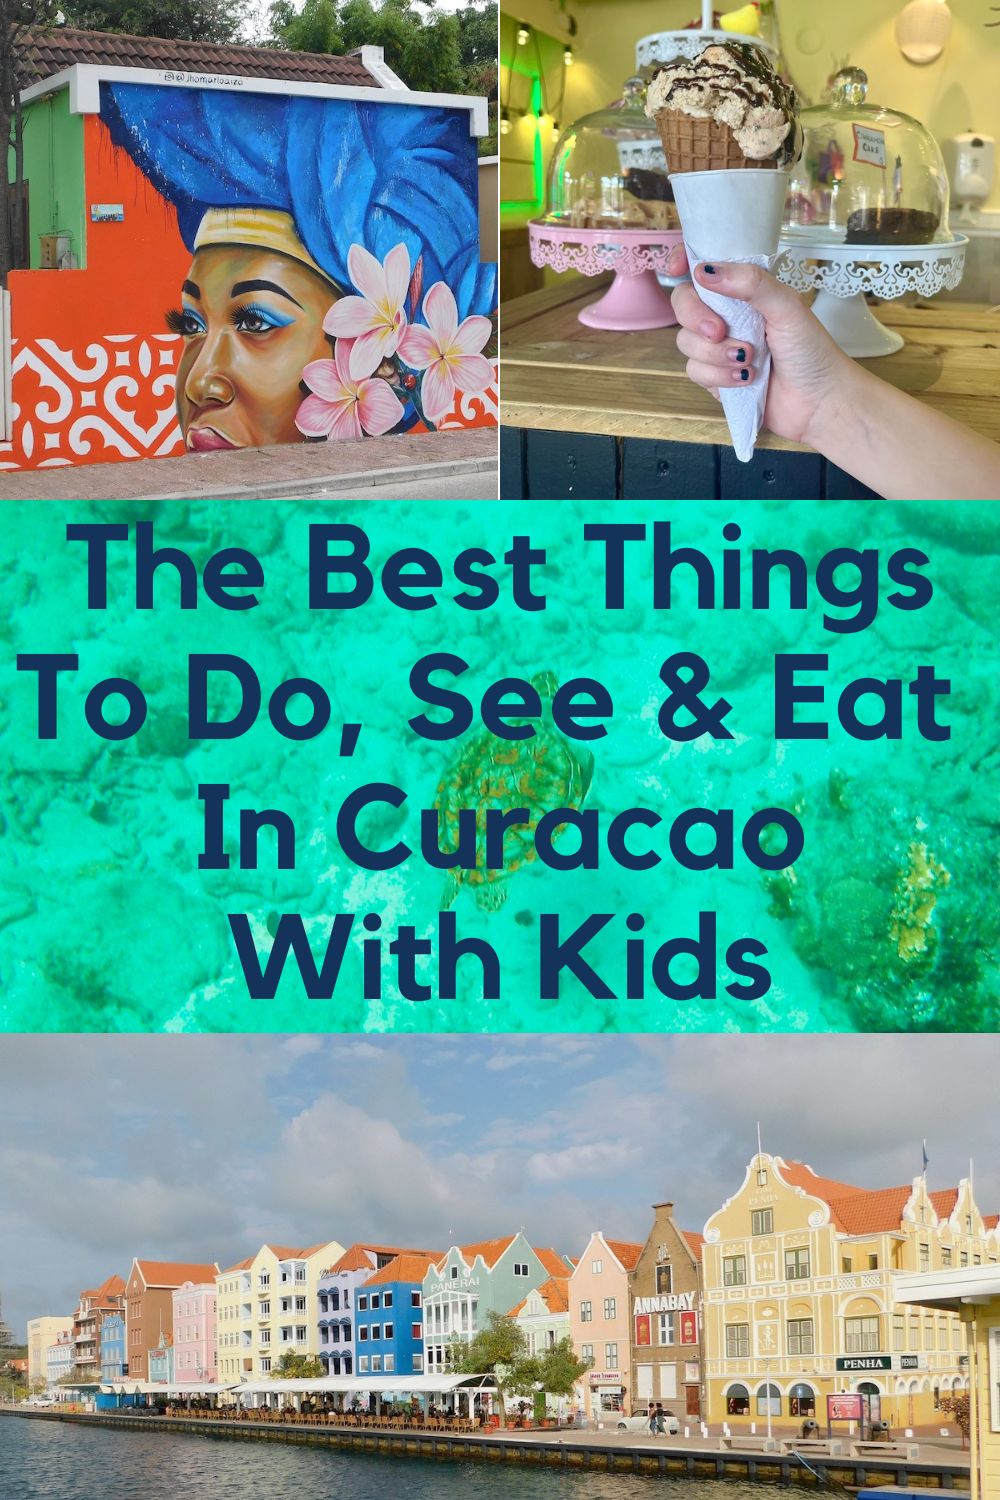 here are 6 of the best things to do in curacao with kids. they include beaches for turtle-spotting, cool caves, colorful streets and street art, and good ice cream.  